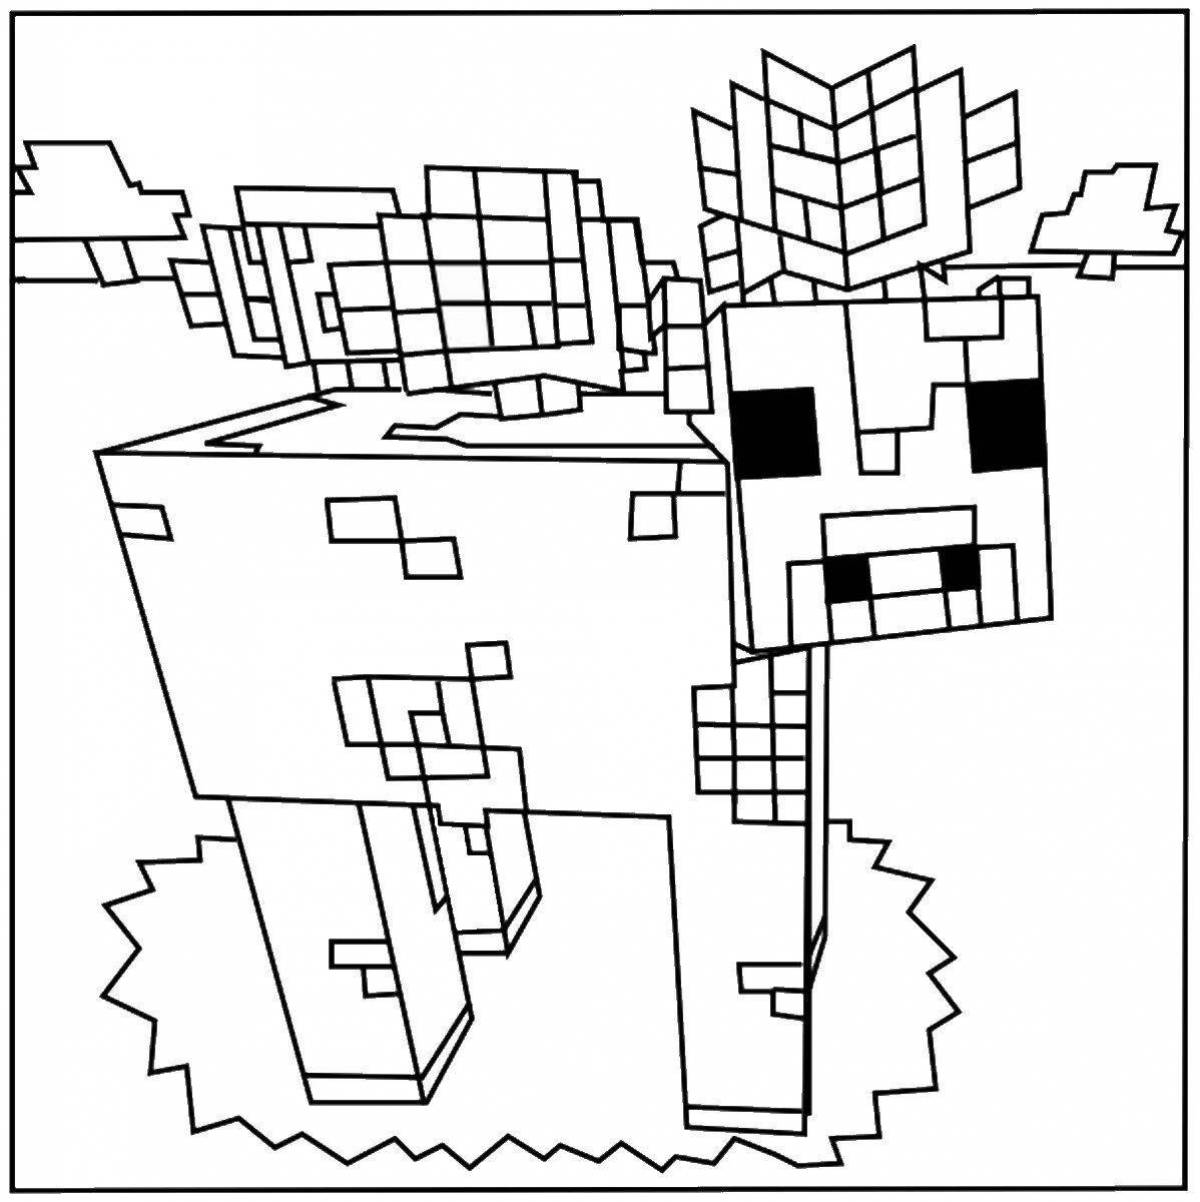 Awesome minecraft style coloring page